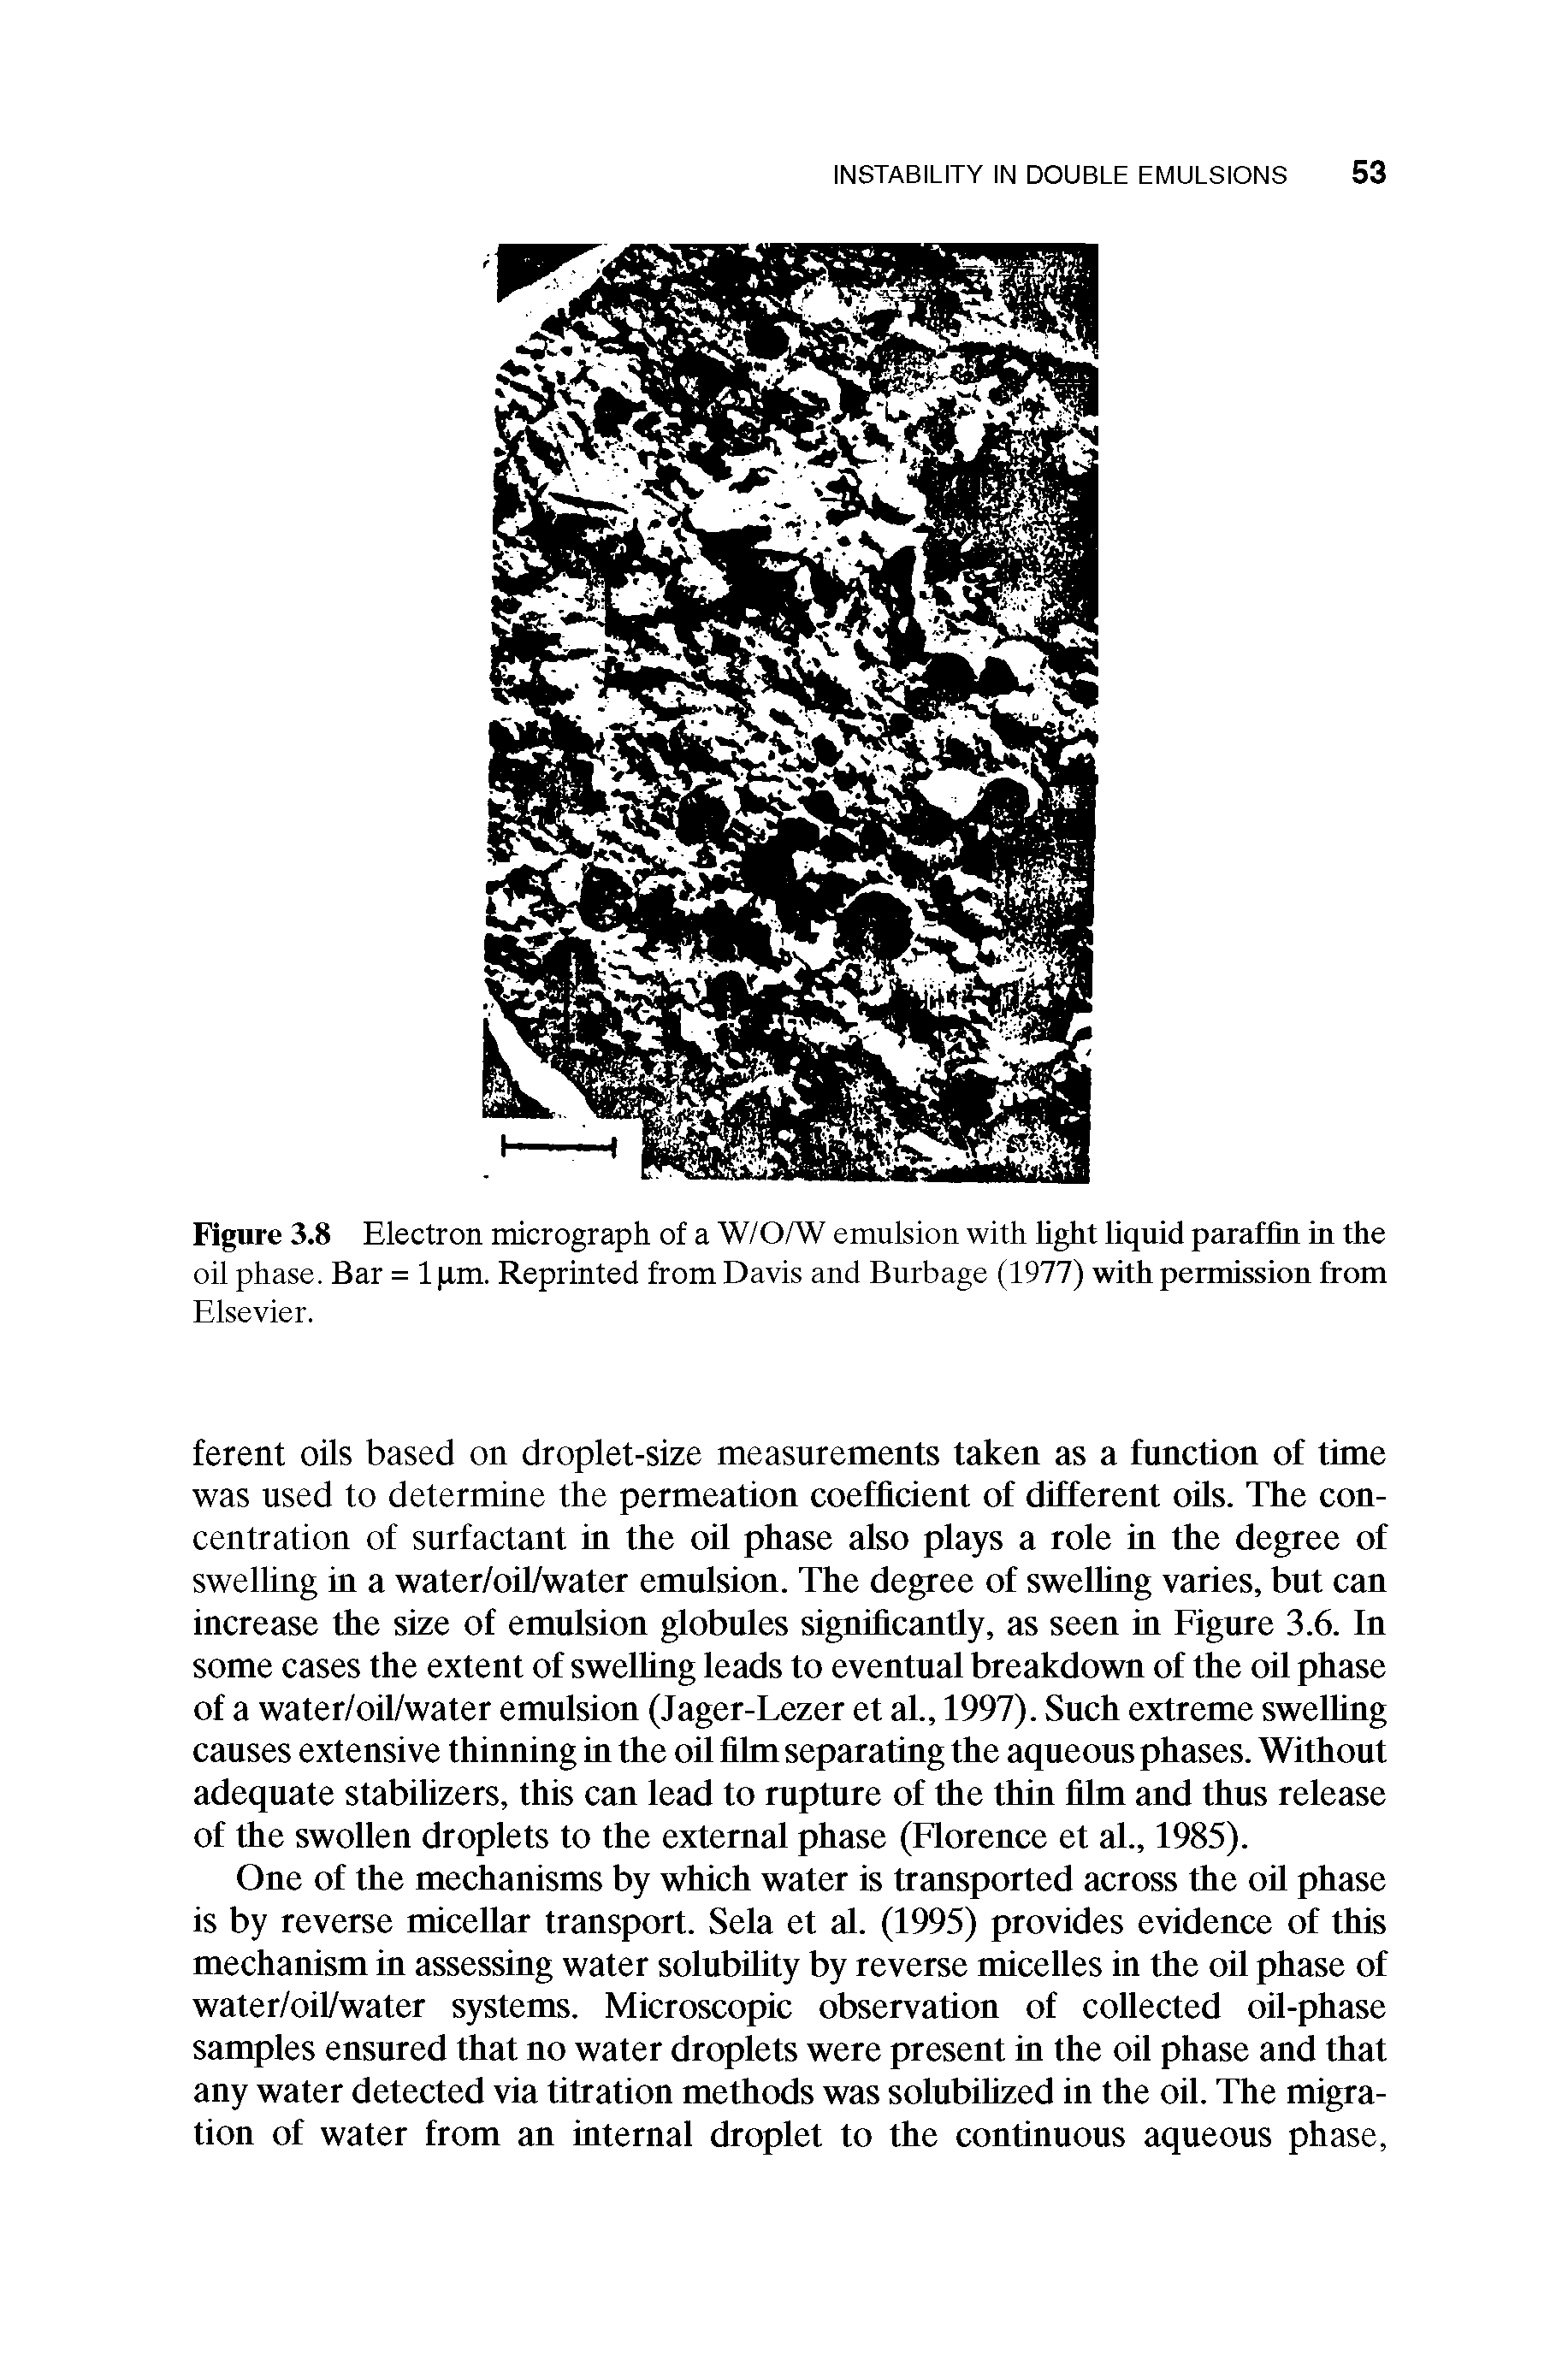 Figure 3.8 Electron micrograph of a W/OAV emulsion with light liquid paraffin in the oil phase. Bar = 1 xm. Reprinted from Davis and Burbage (1977) with permission from...